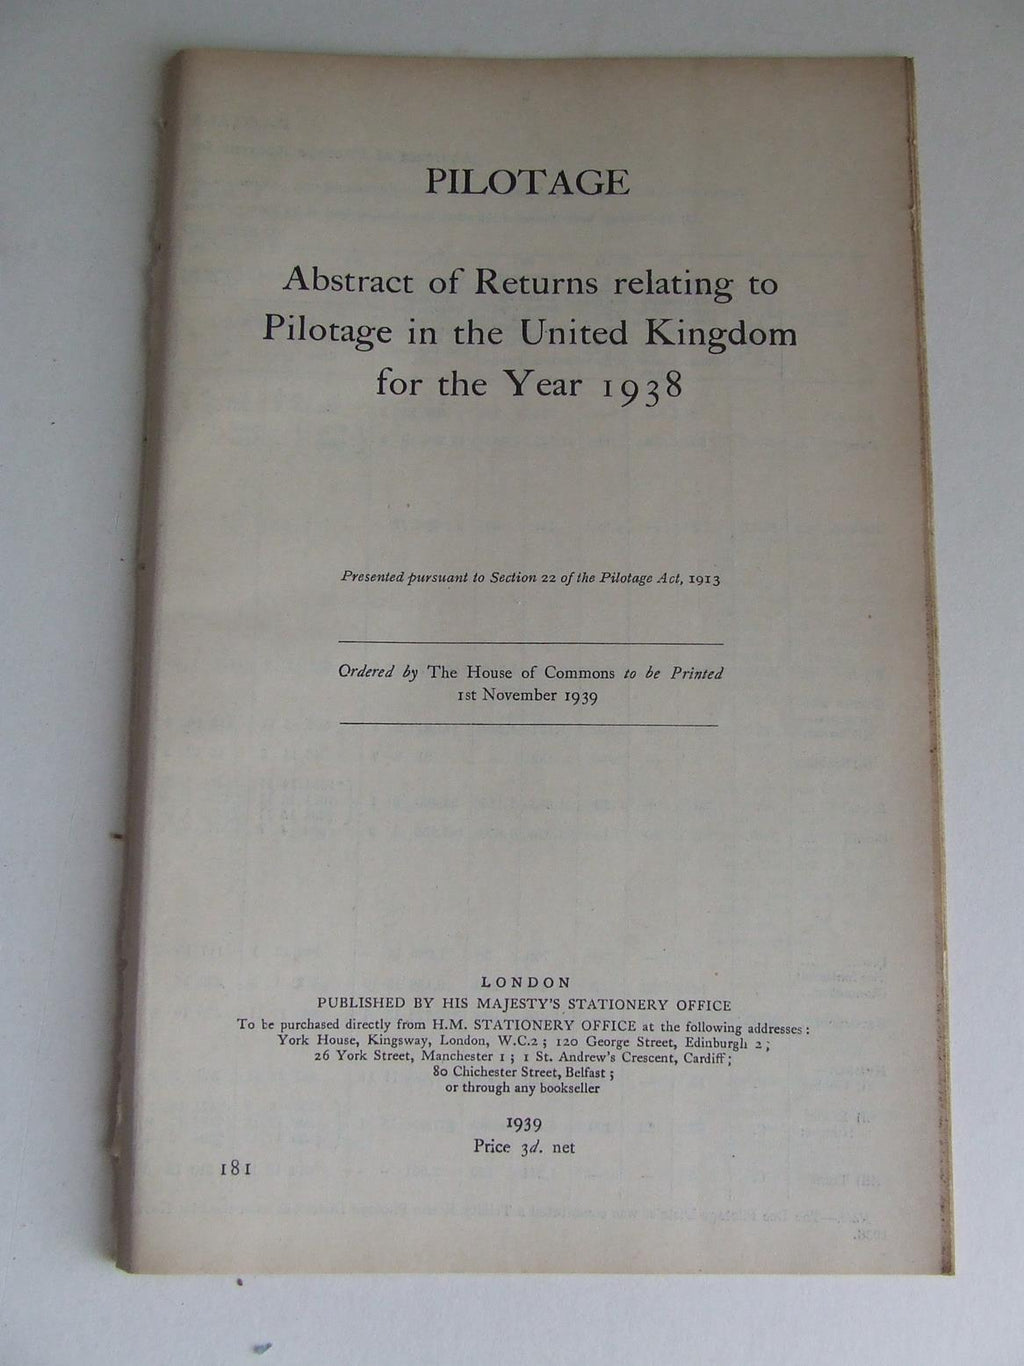 Abstract of Returns Relating to Pilots and Pilotage in the United Kingdom for the year 1938